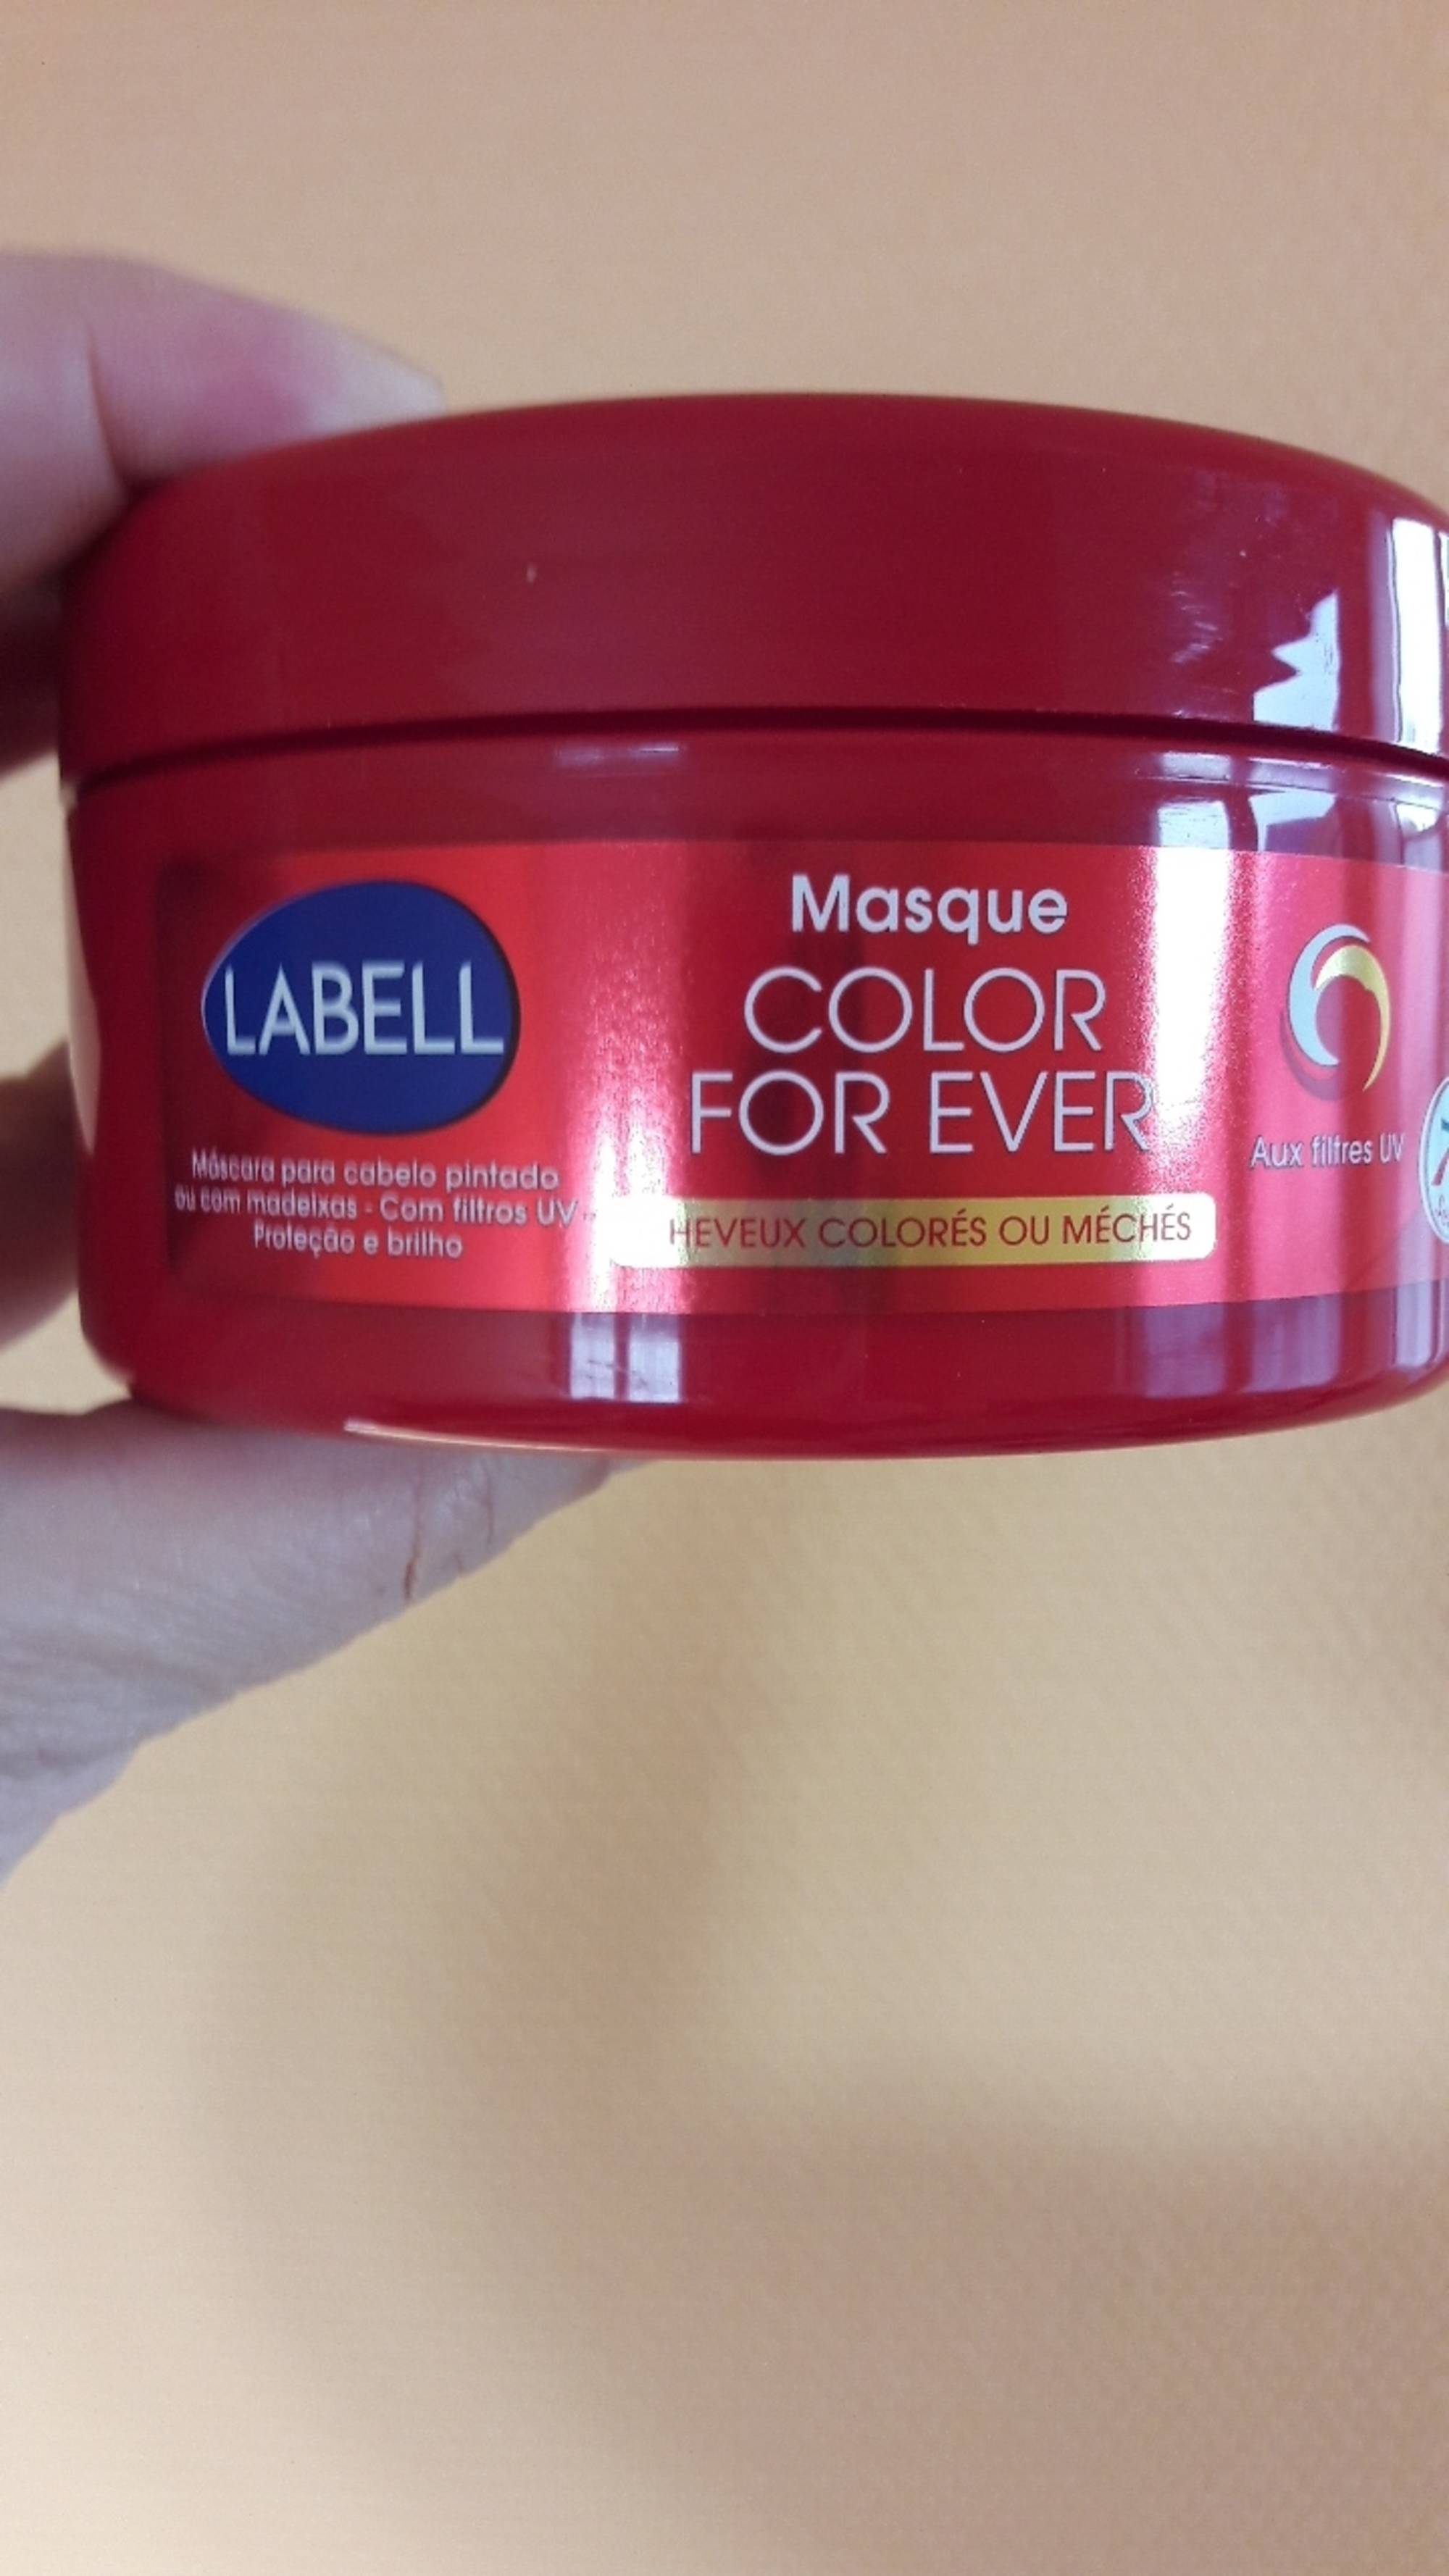 LABELL - Color for ever - Masque